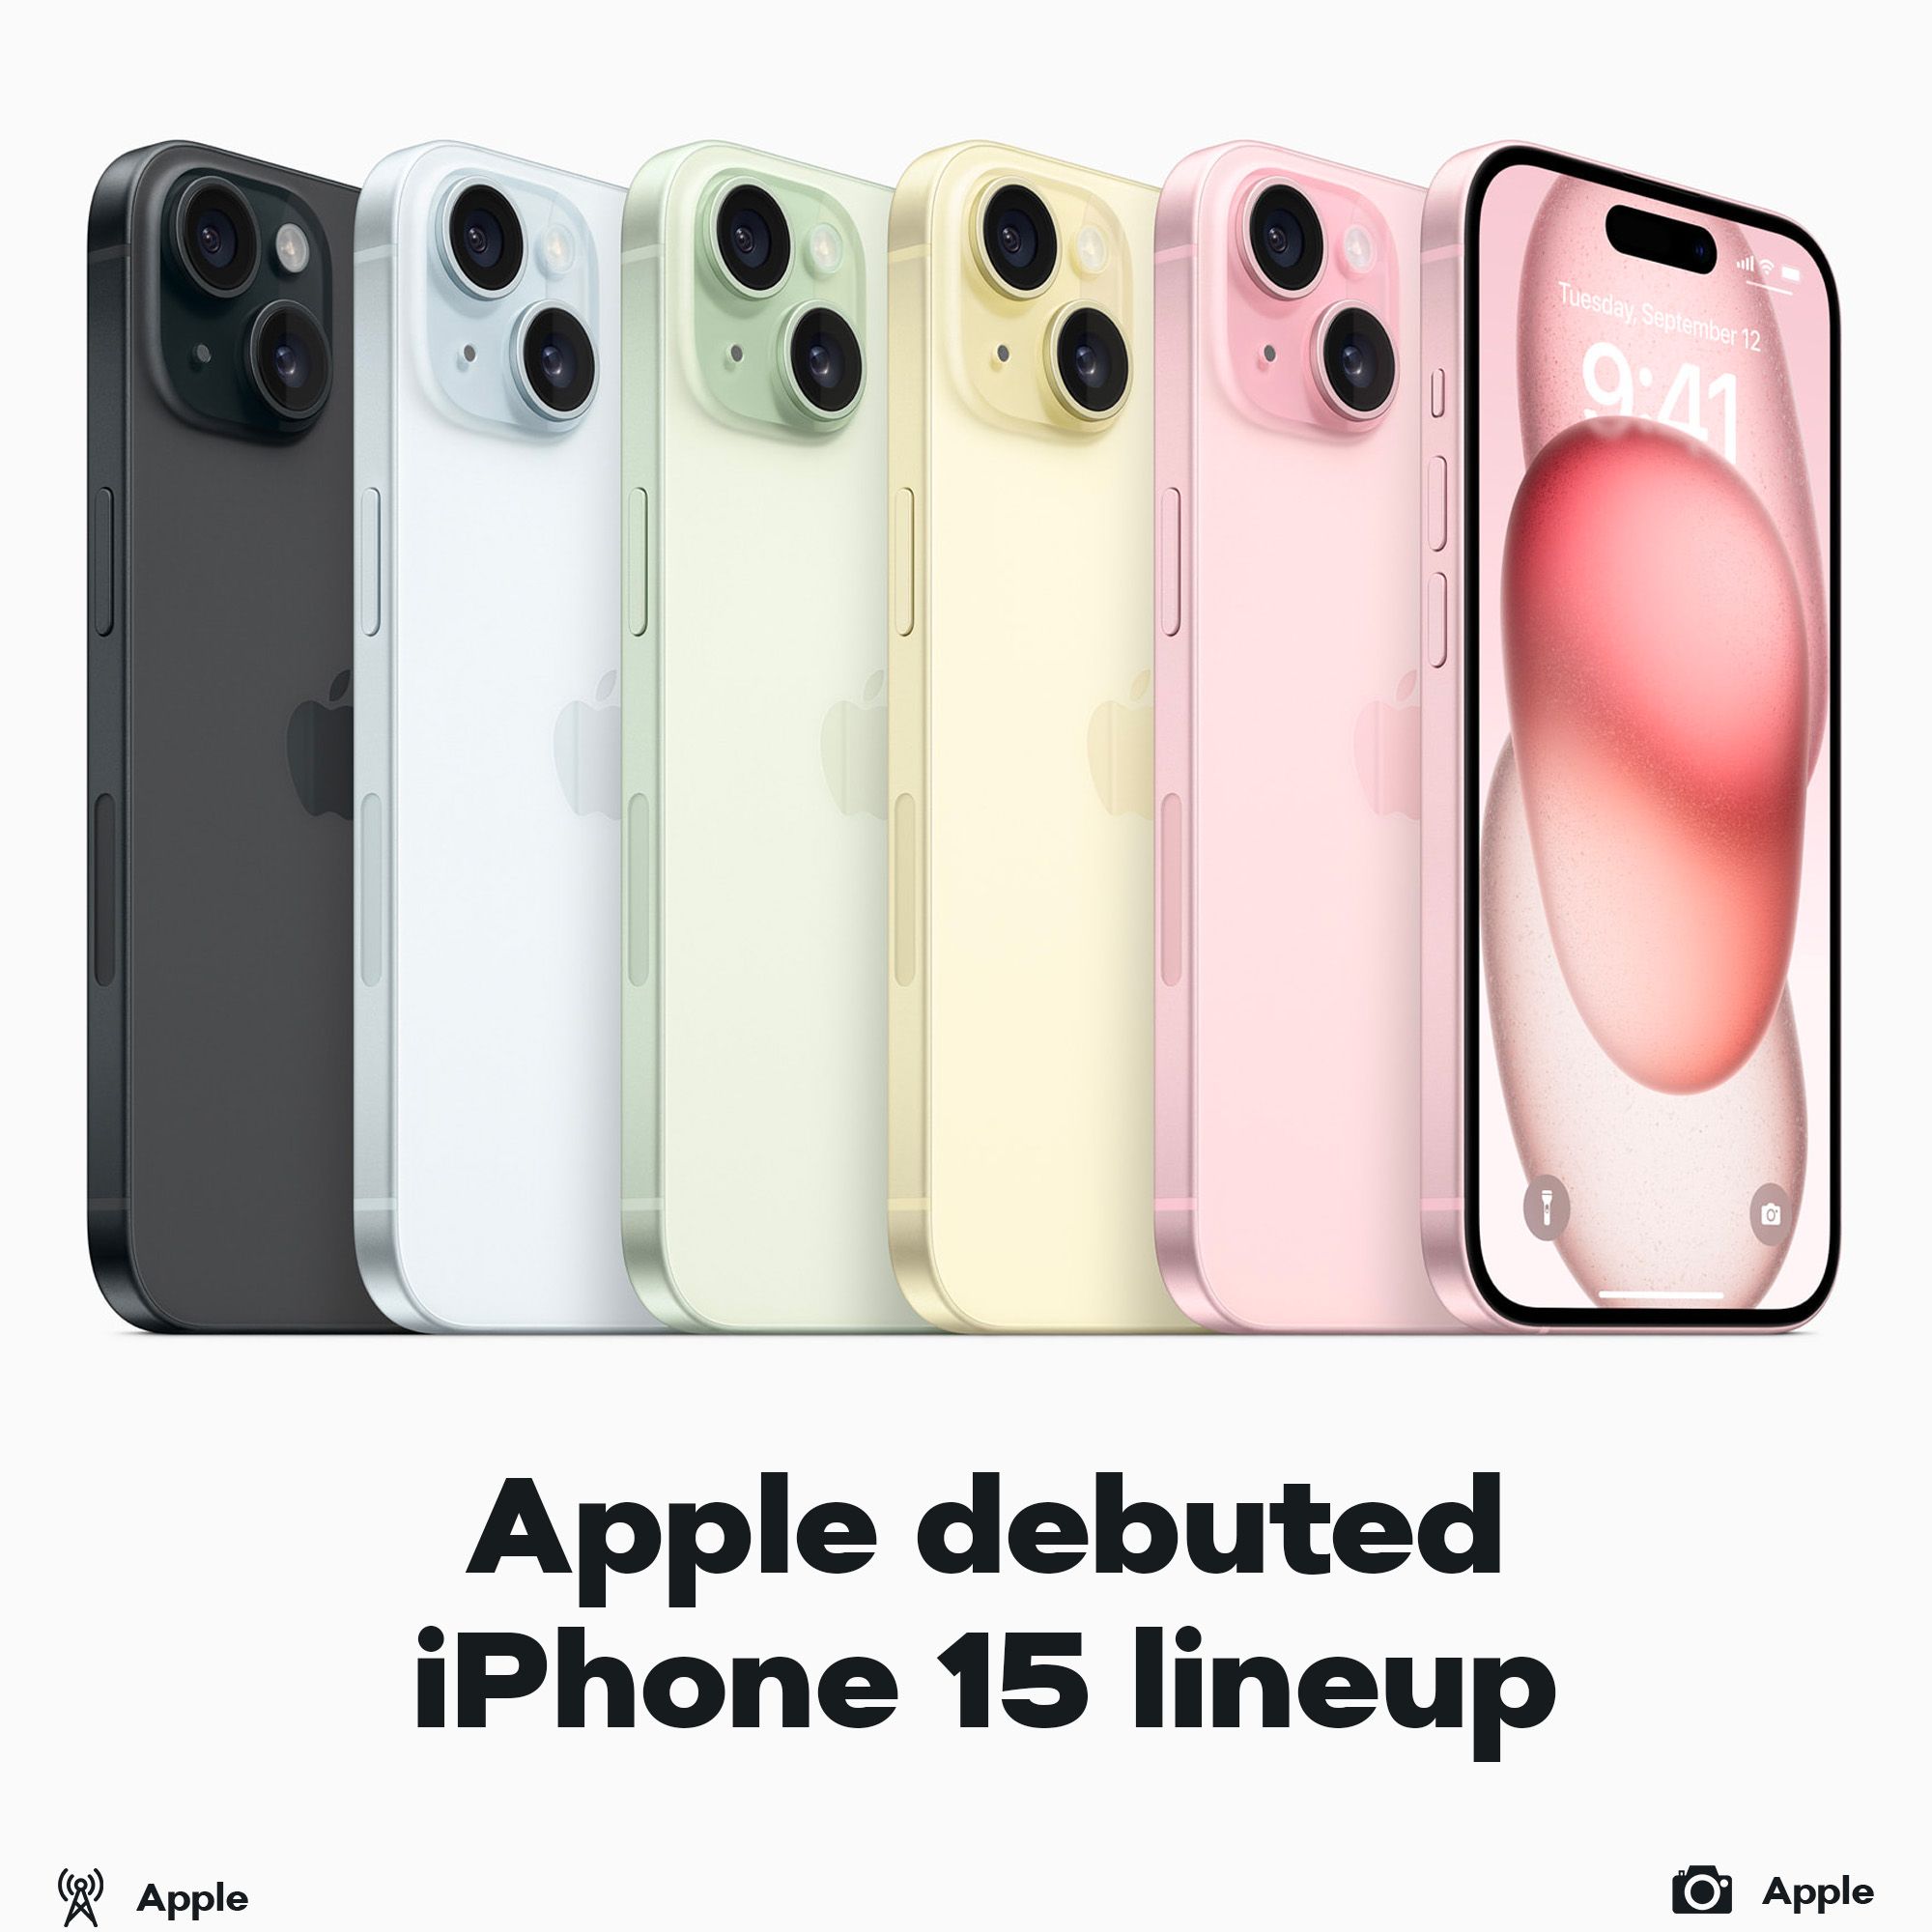 iPhone 15 debuted